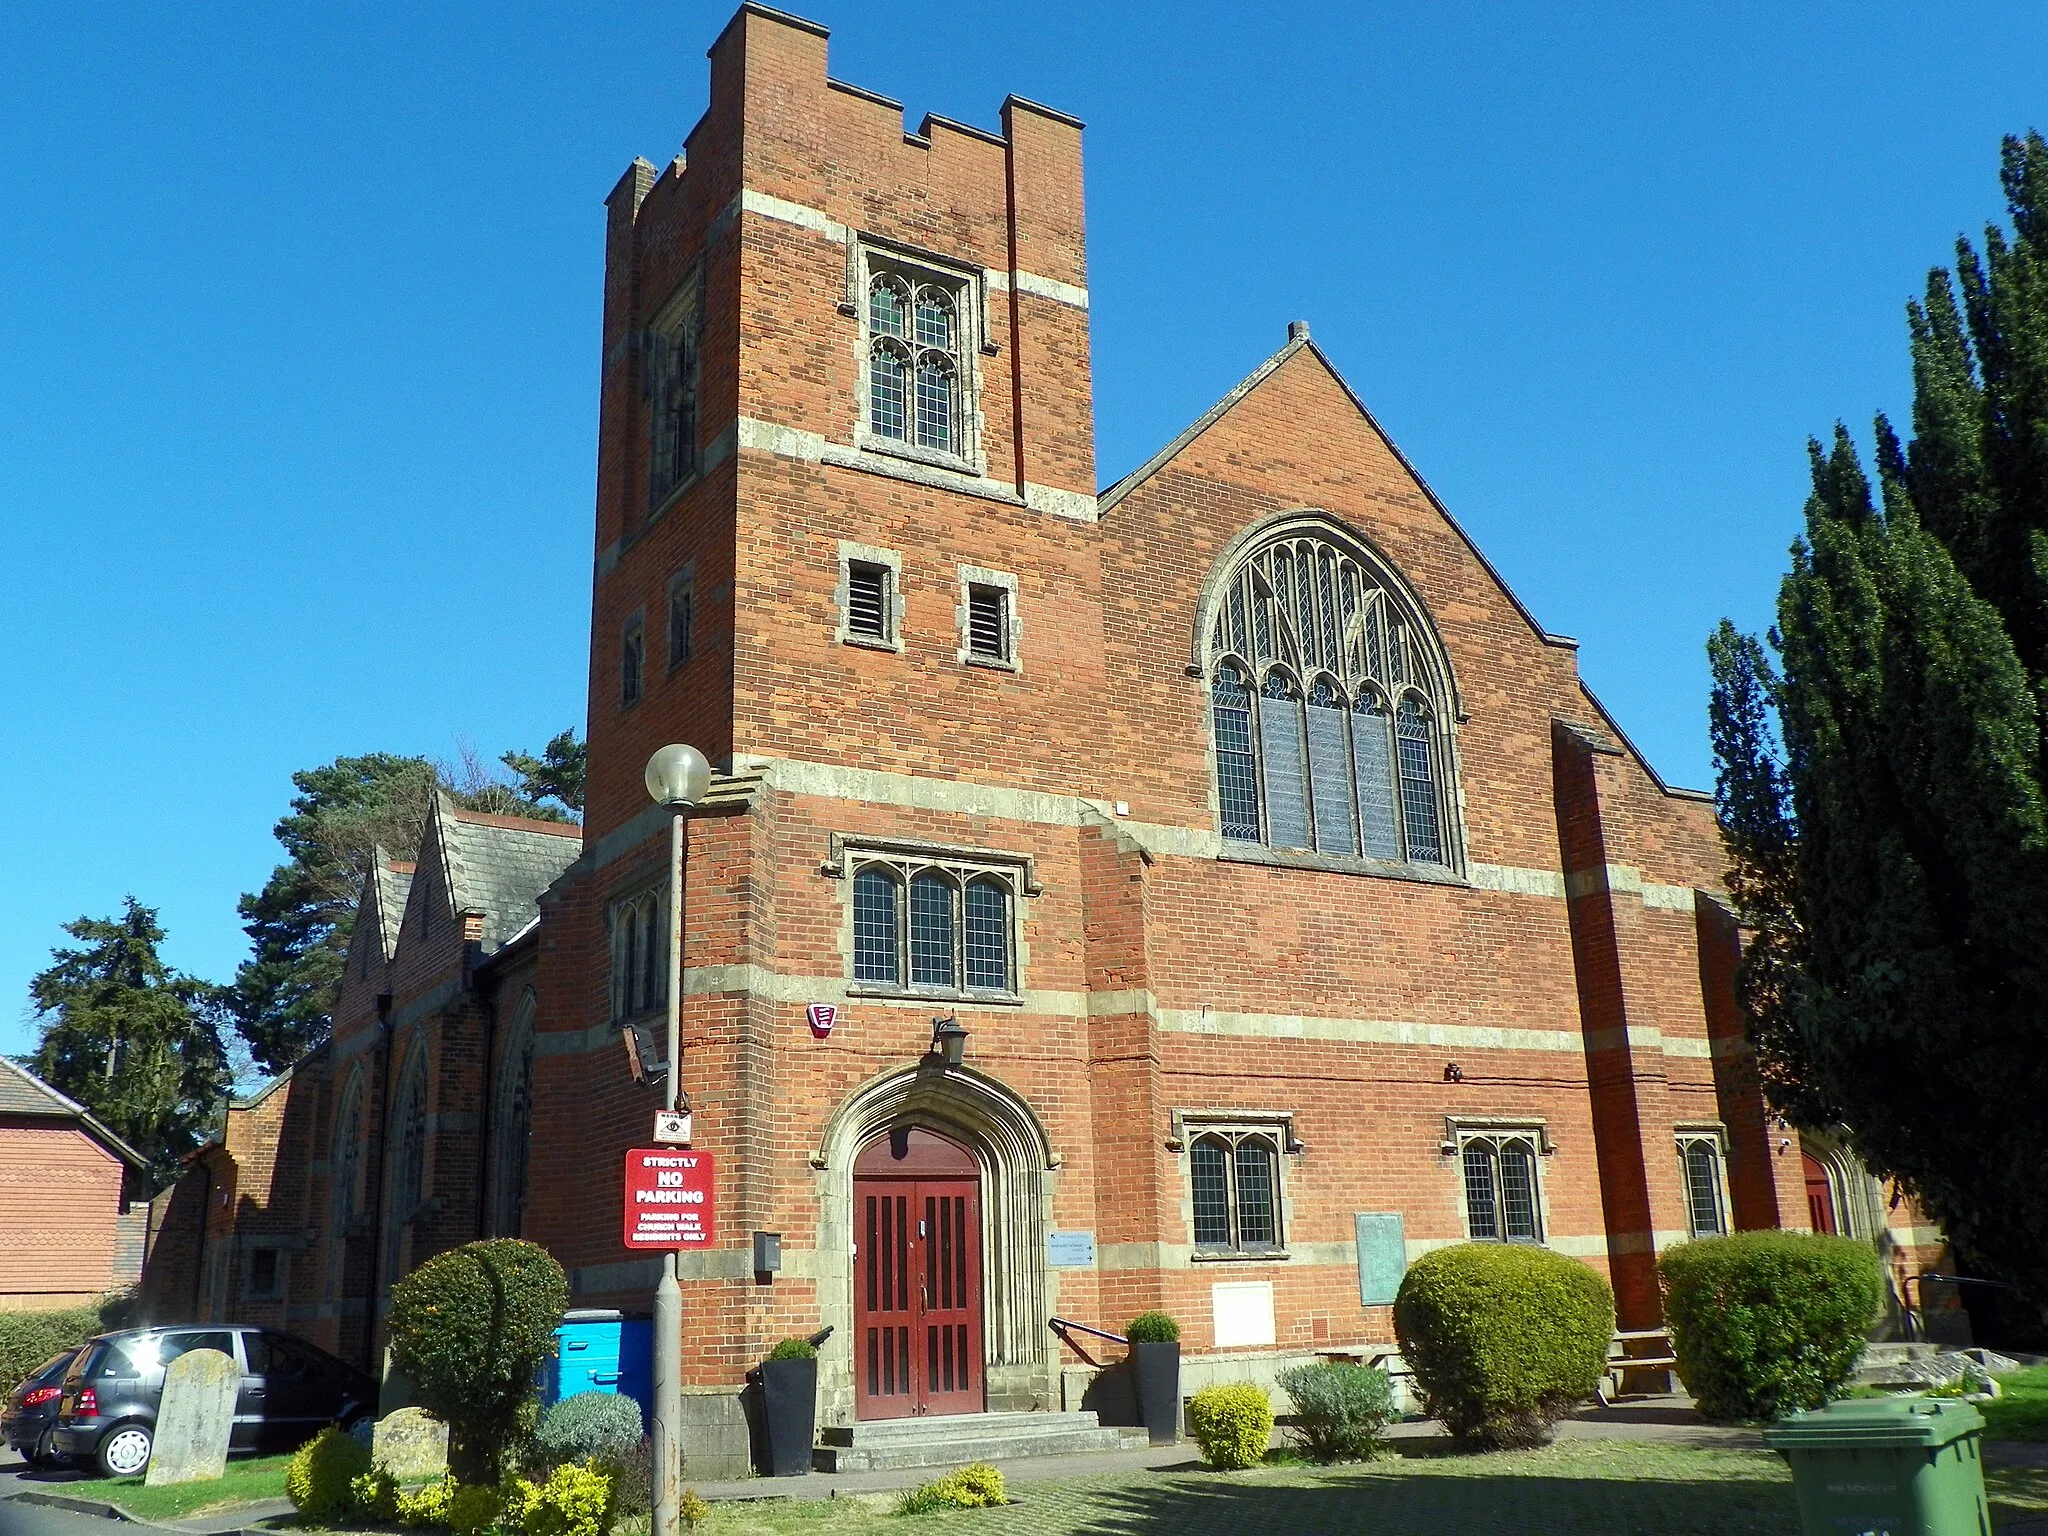 Photo showing: Former Congregational Church, Bushey, Hertfordshire (Grade II). 1904 chapel in red brick witih stone dressings, in the Free Gothic style (whatever that is). This is now the Margaret Howard Theatre and Studios.

GOC Hertfordshire's walk on 8 April 2017, a 9.9-mile circular walk in and around Harrow Weald in London and Bushey and South Oxhey in Hertfordshire. Martin t led the walk, which was attended by 16 people. You can view my other photos of this event, read the original event report, find out more about the Gay Outdoor Club or see my collections.